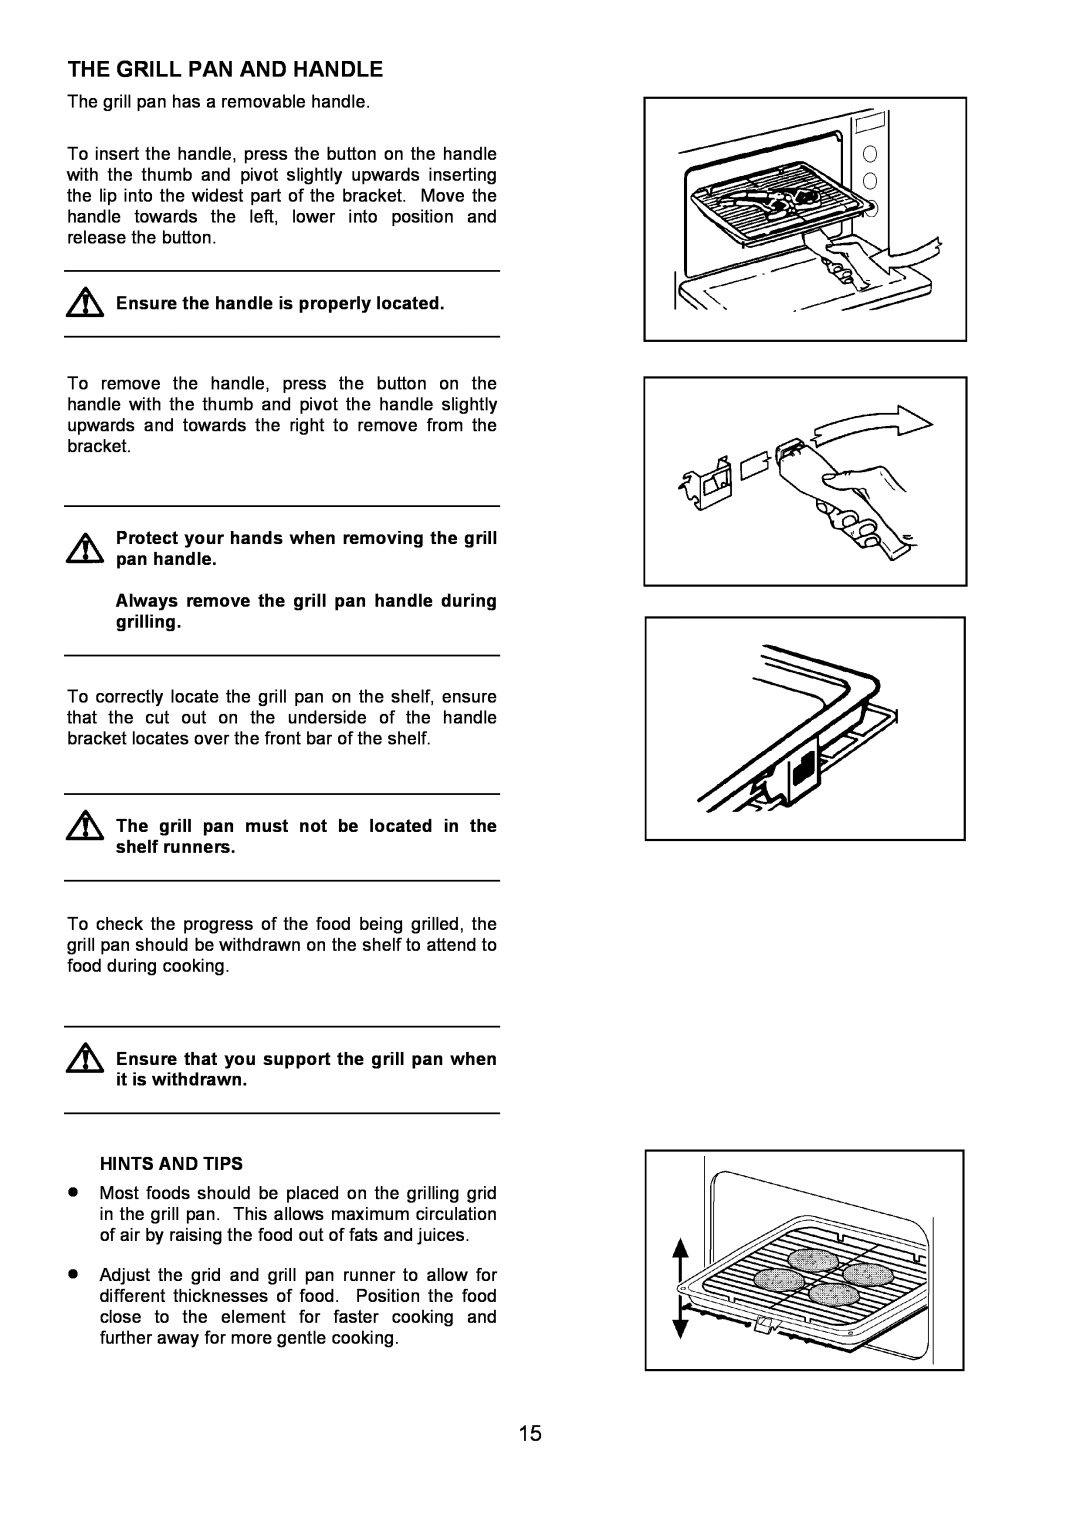 Zanussi 311608901 manual The Grill Pan And Handle, Ensure the handle is properly located, Hints And Tips 